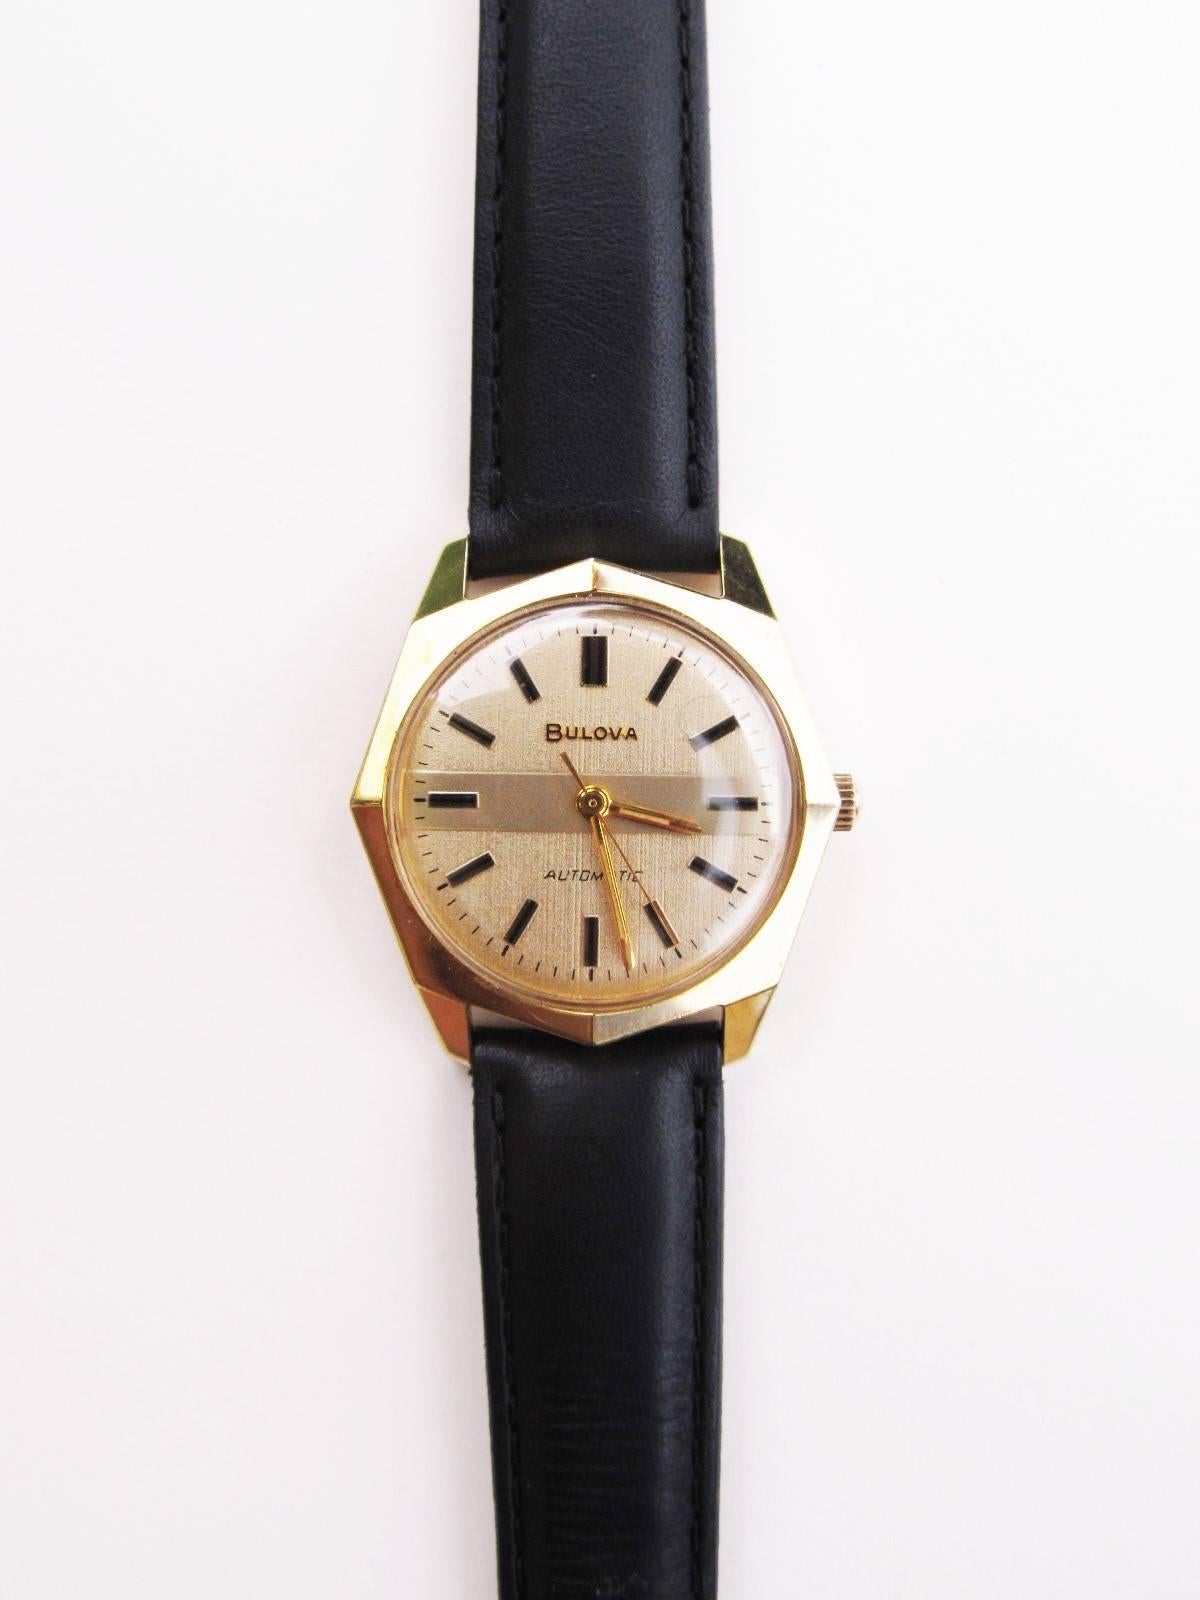 A striking and stylish men's watch in 10-karat RGP. Date code in the back, N3, dates it to 1973. Recently serviced, and in excellent working condition.